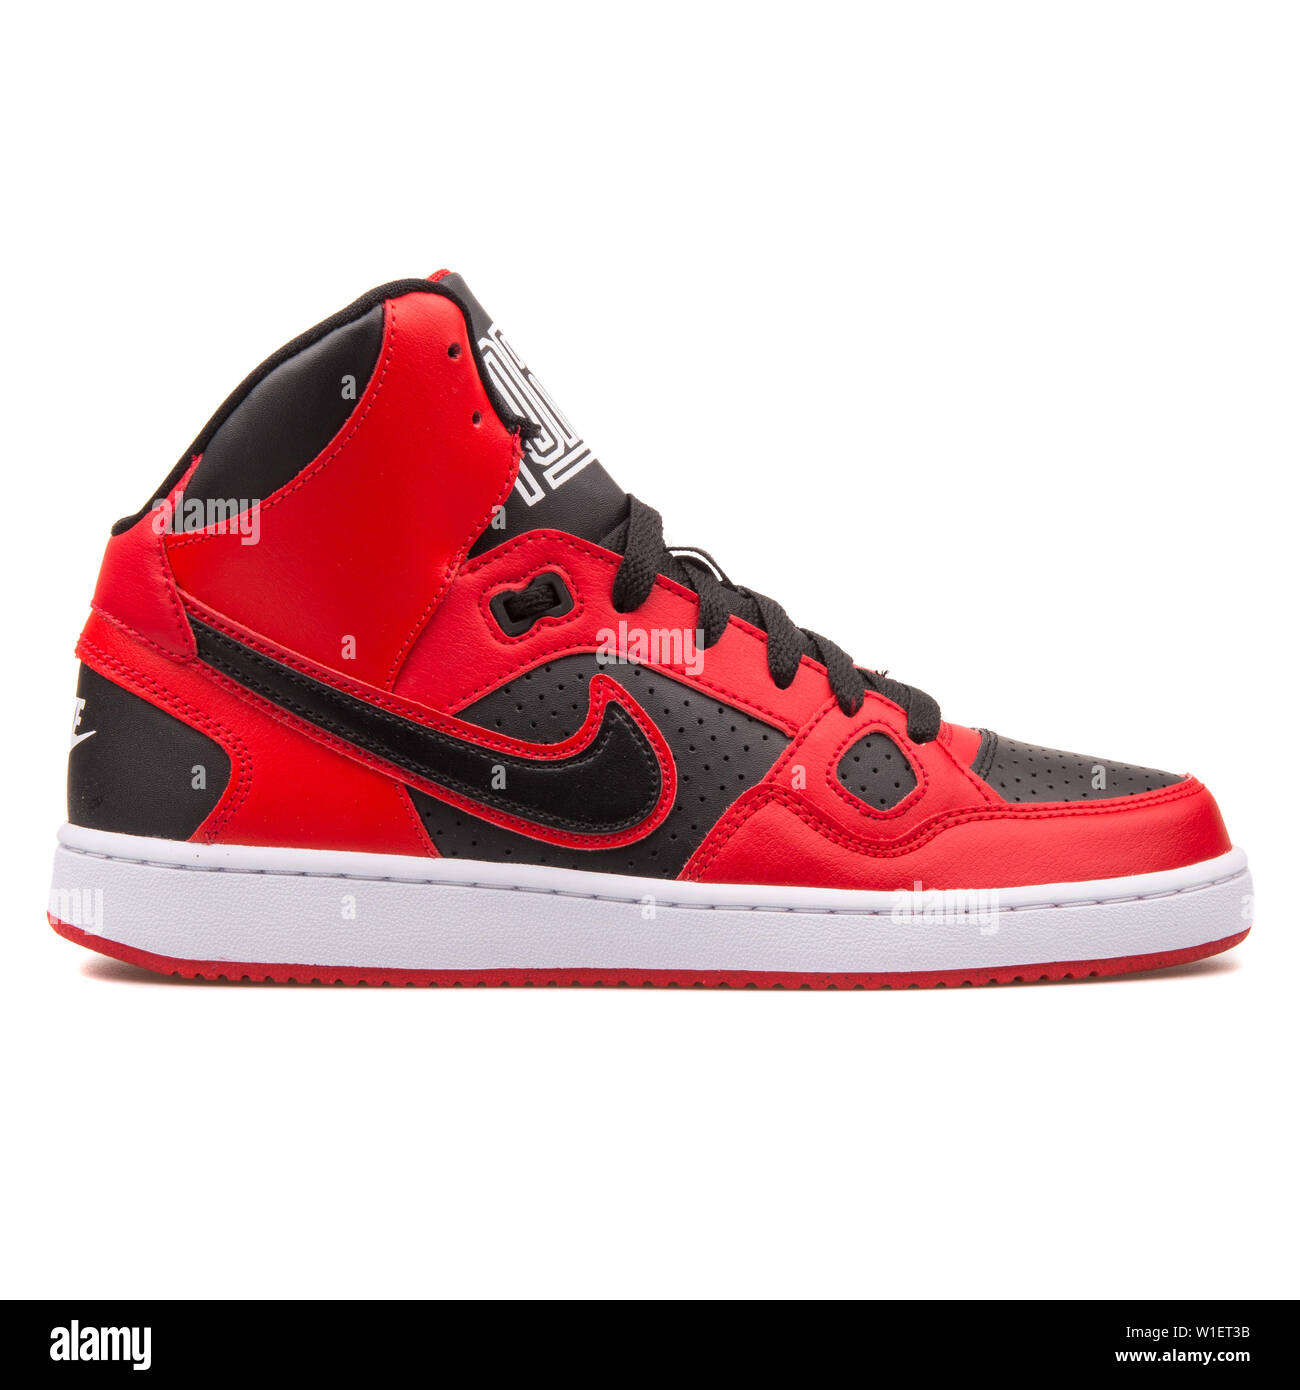 nike son of force mid red black